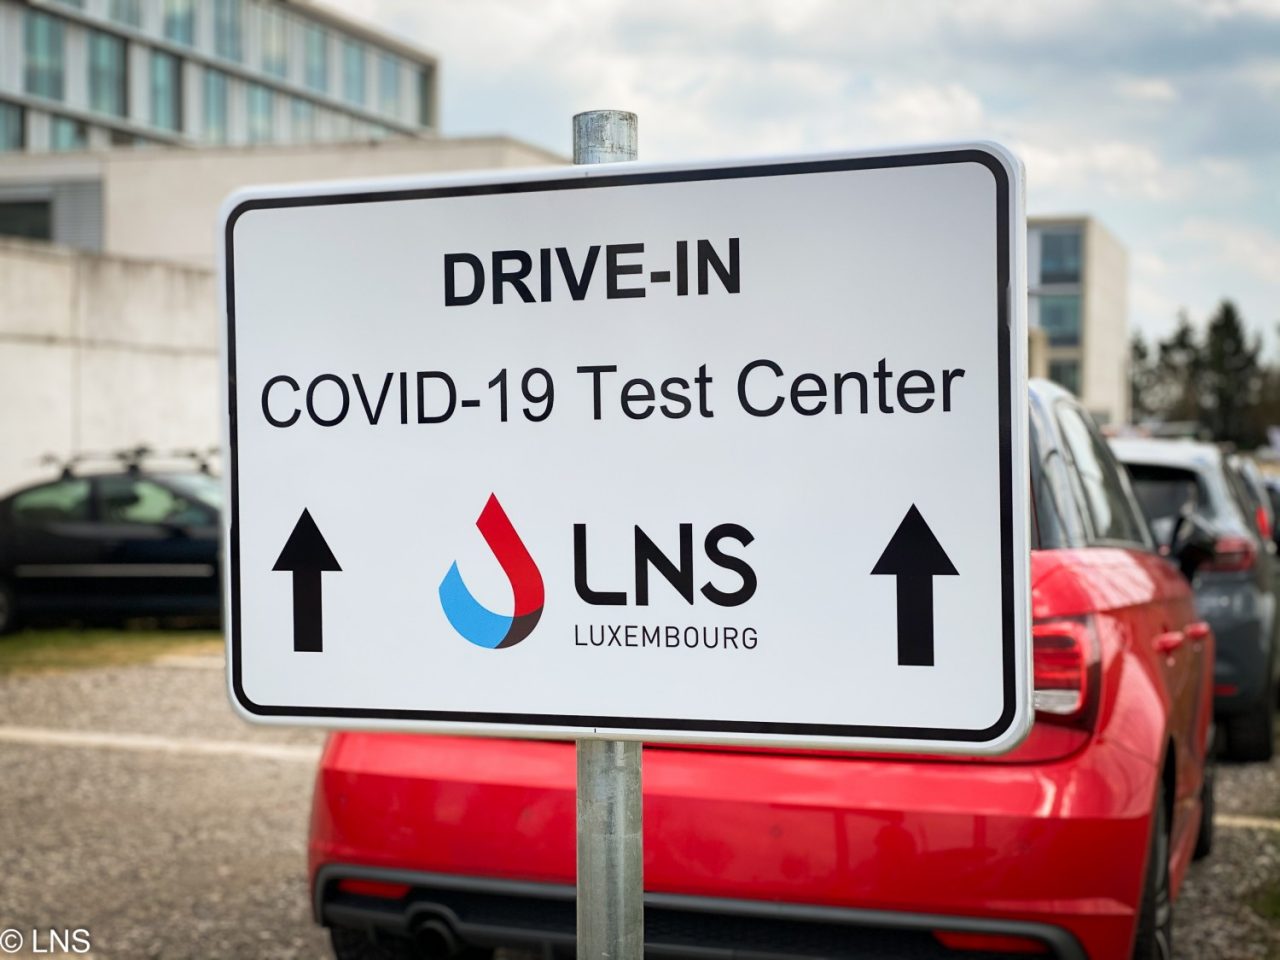 The LNS COVID-19 drive-in Test Center will be closed on public holidays